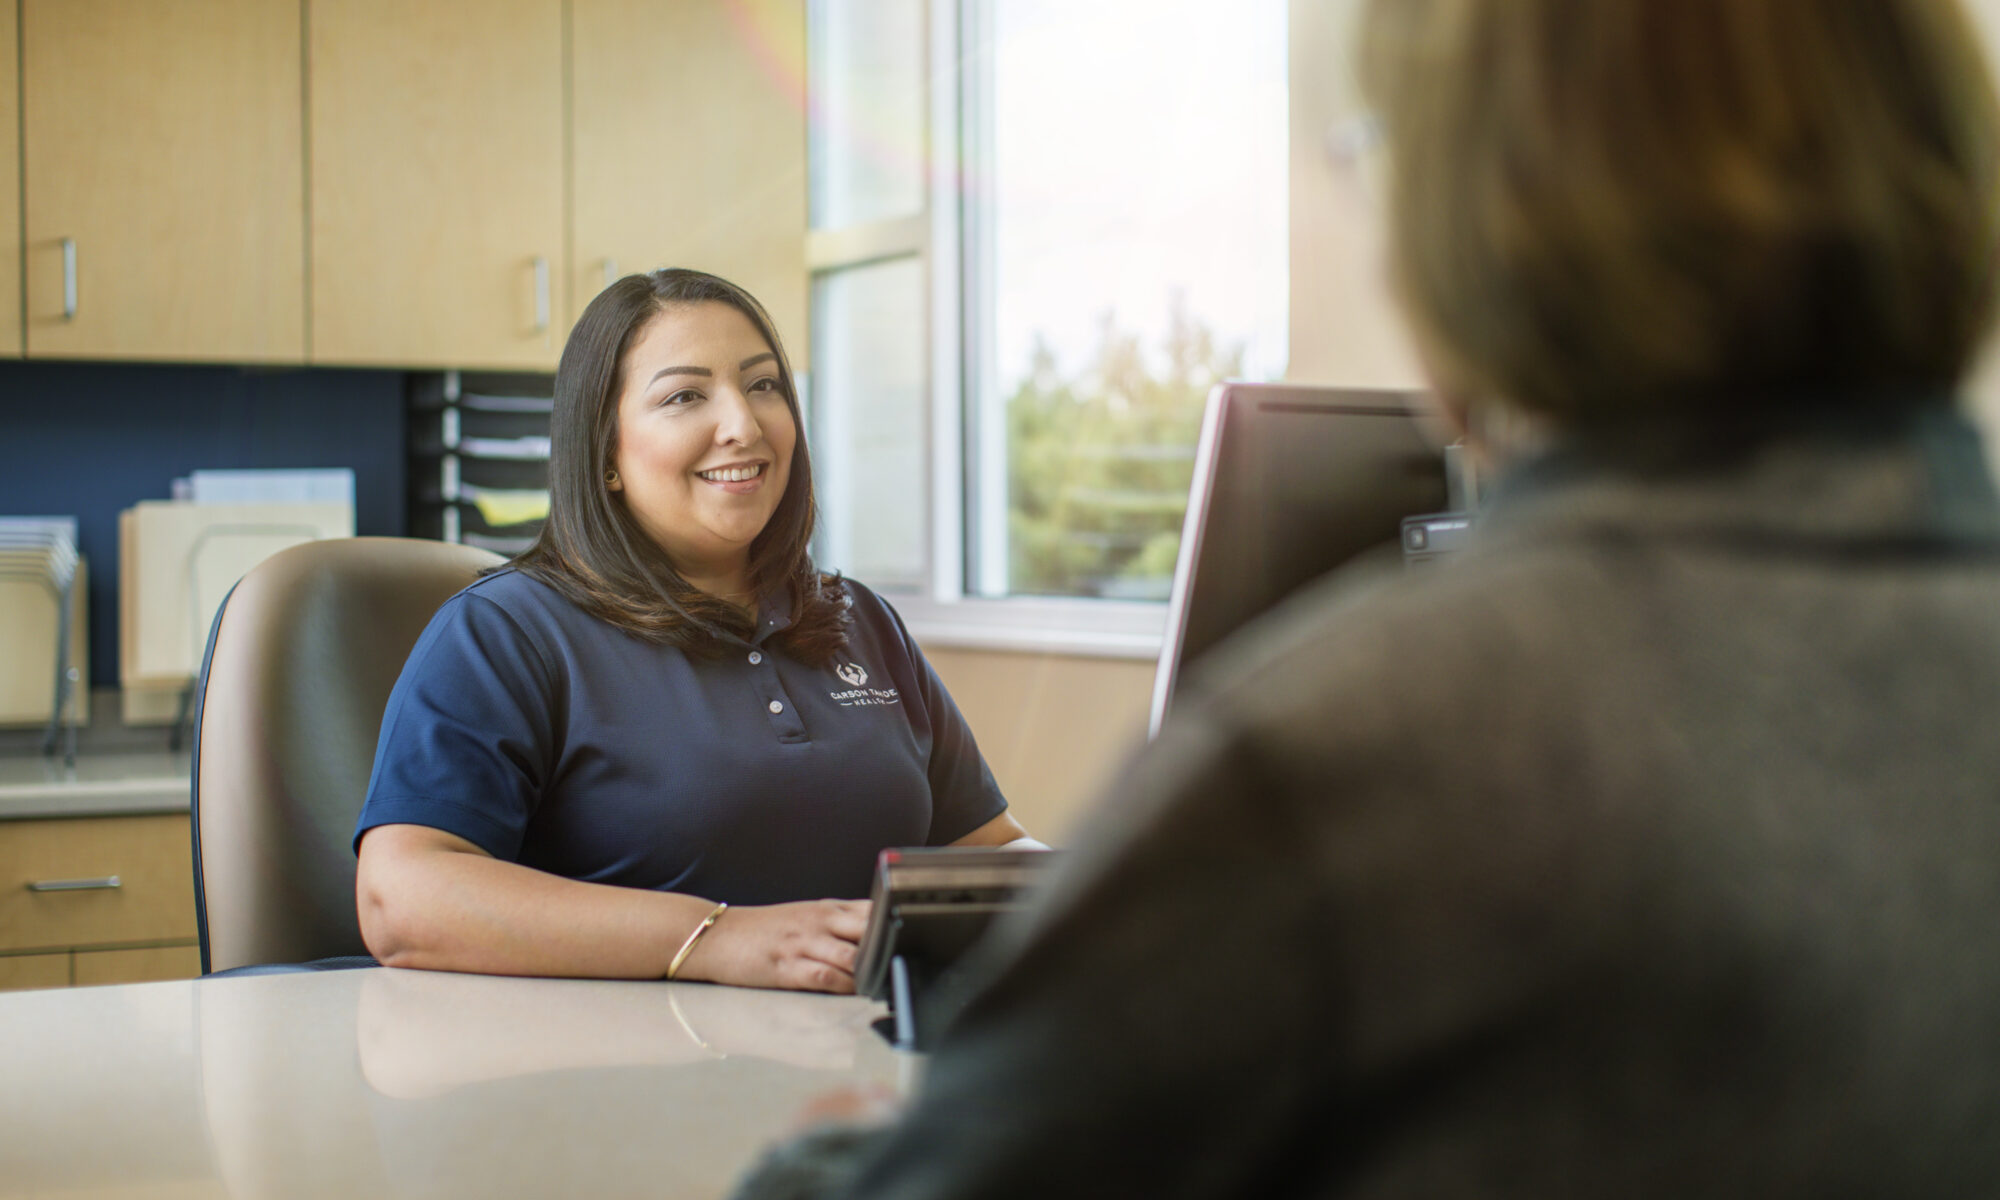 Carson Tahoe Implements Advanced Electronic Medical Record Program To Improve Patient Care